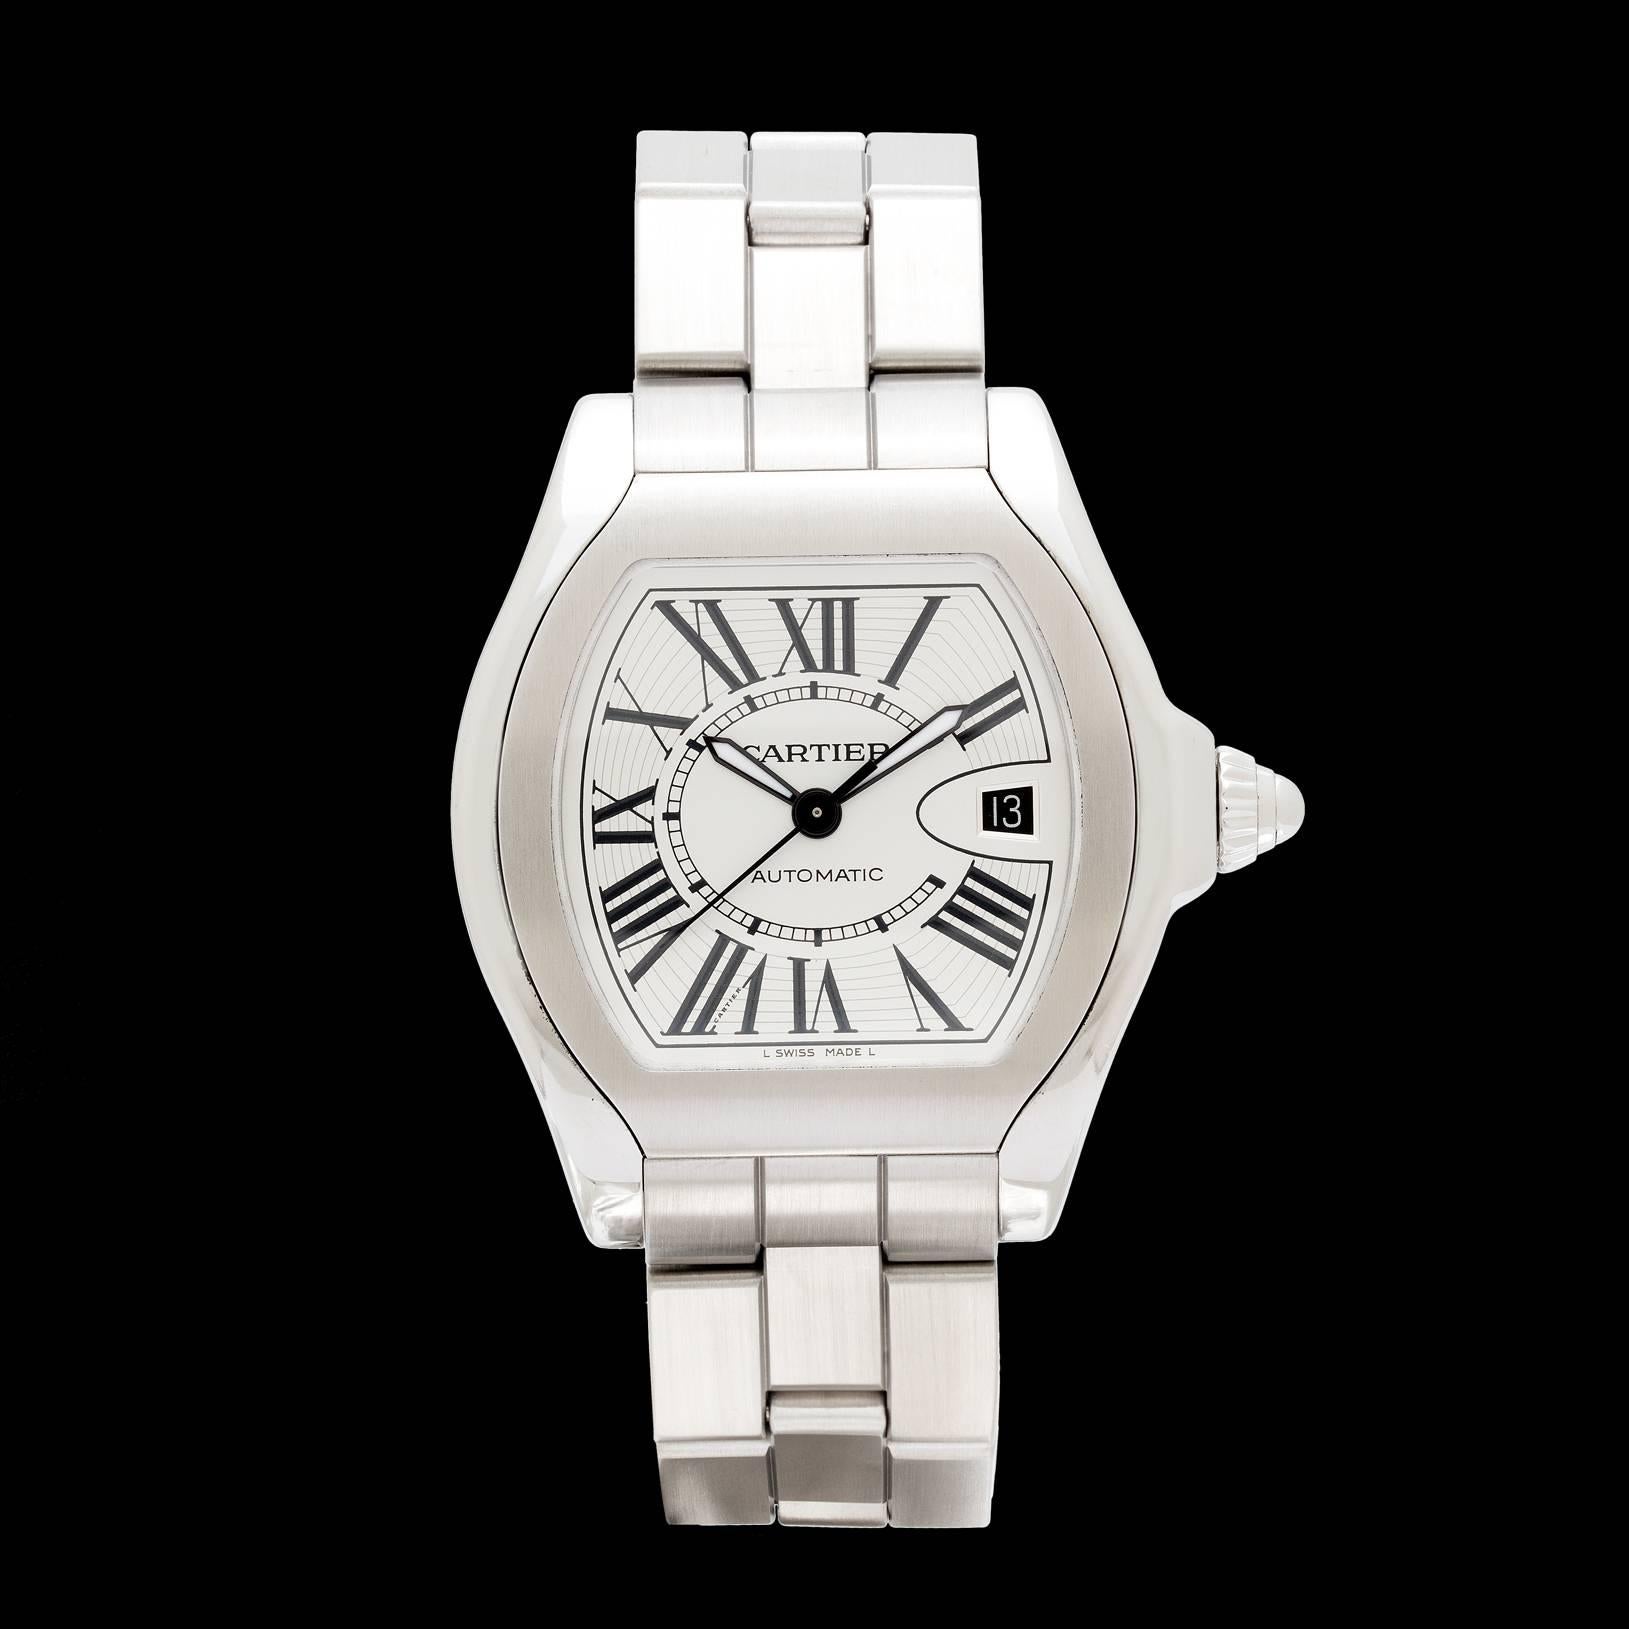 Cartier Roadster “S” timepiece inspired by the classic cars raced in the 1950's and 1960's, measures about 45.9 mm wide & 11.8mm thick and has a Cartier Caliber 049 automatic movement. All stainless steel with a satin finish bezel and bracelet,